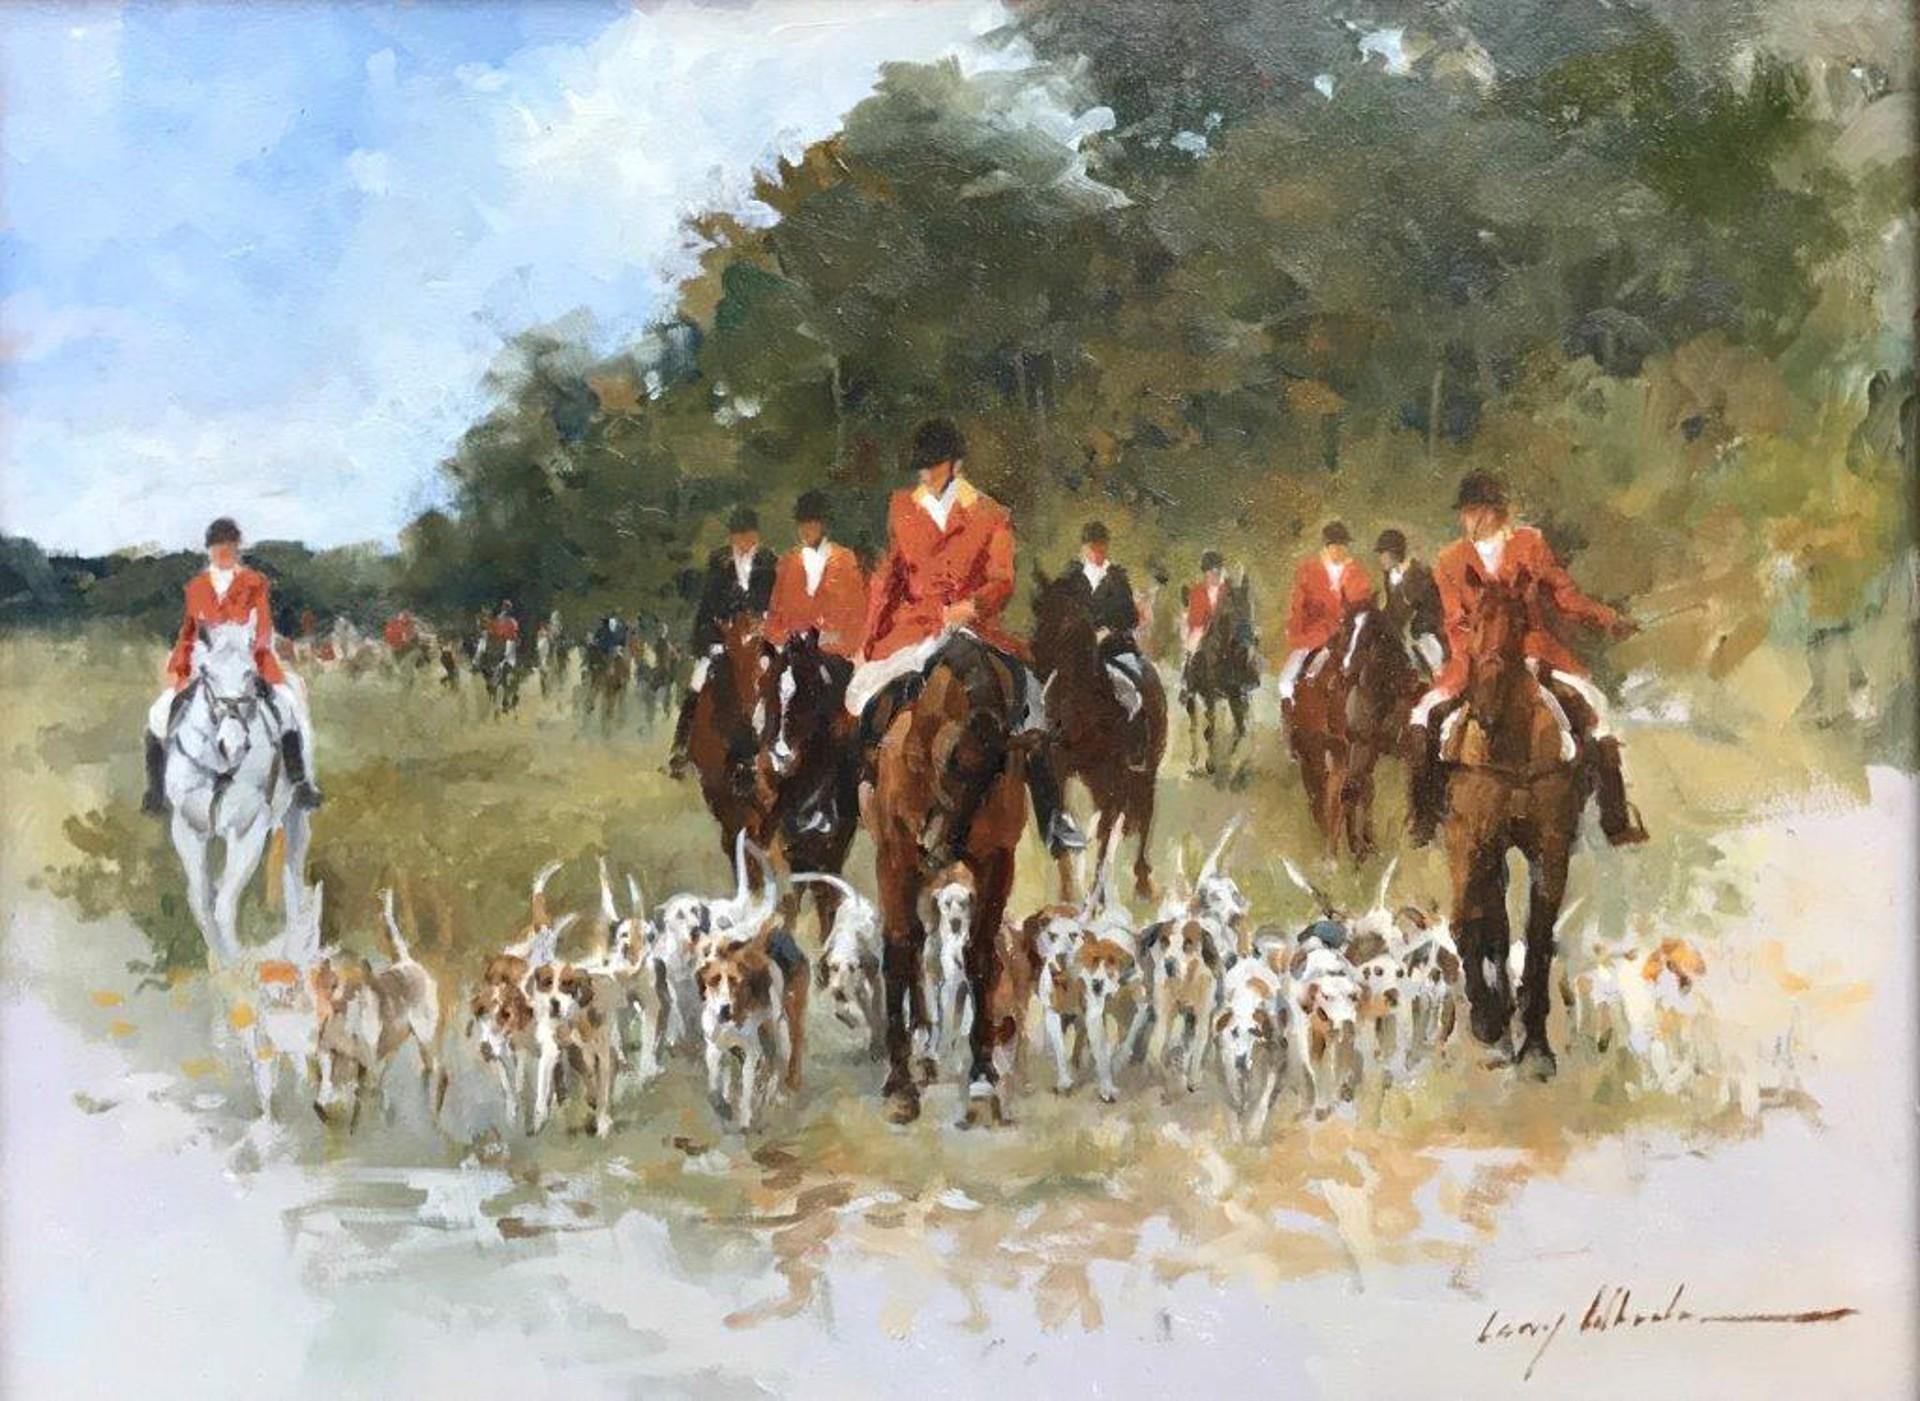 Larry Wheeler Landscape Painting - Contemporary, impressionistic Fox Hunt scene by well established equine artist